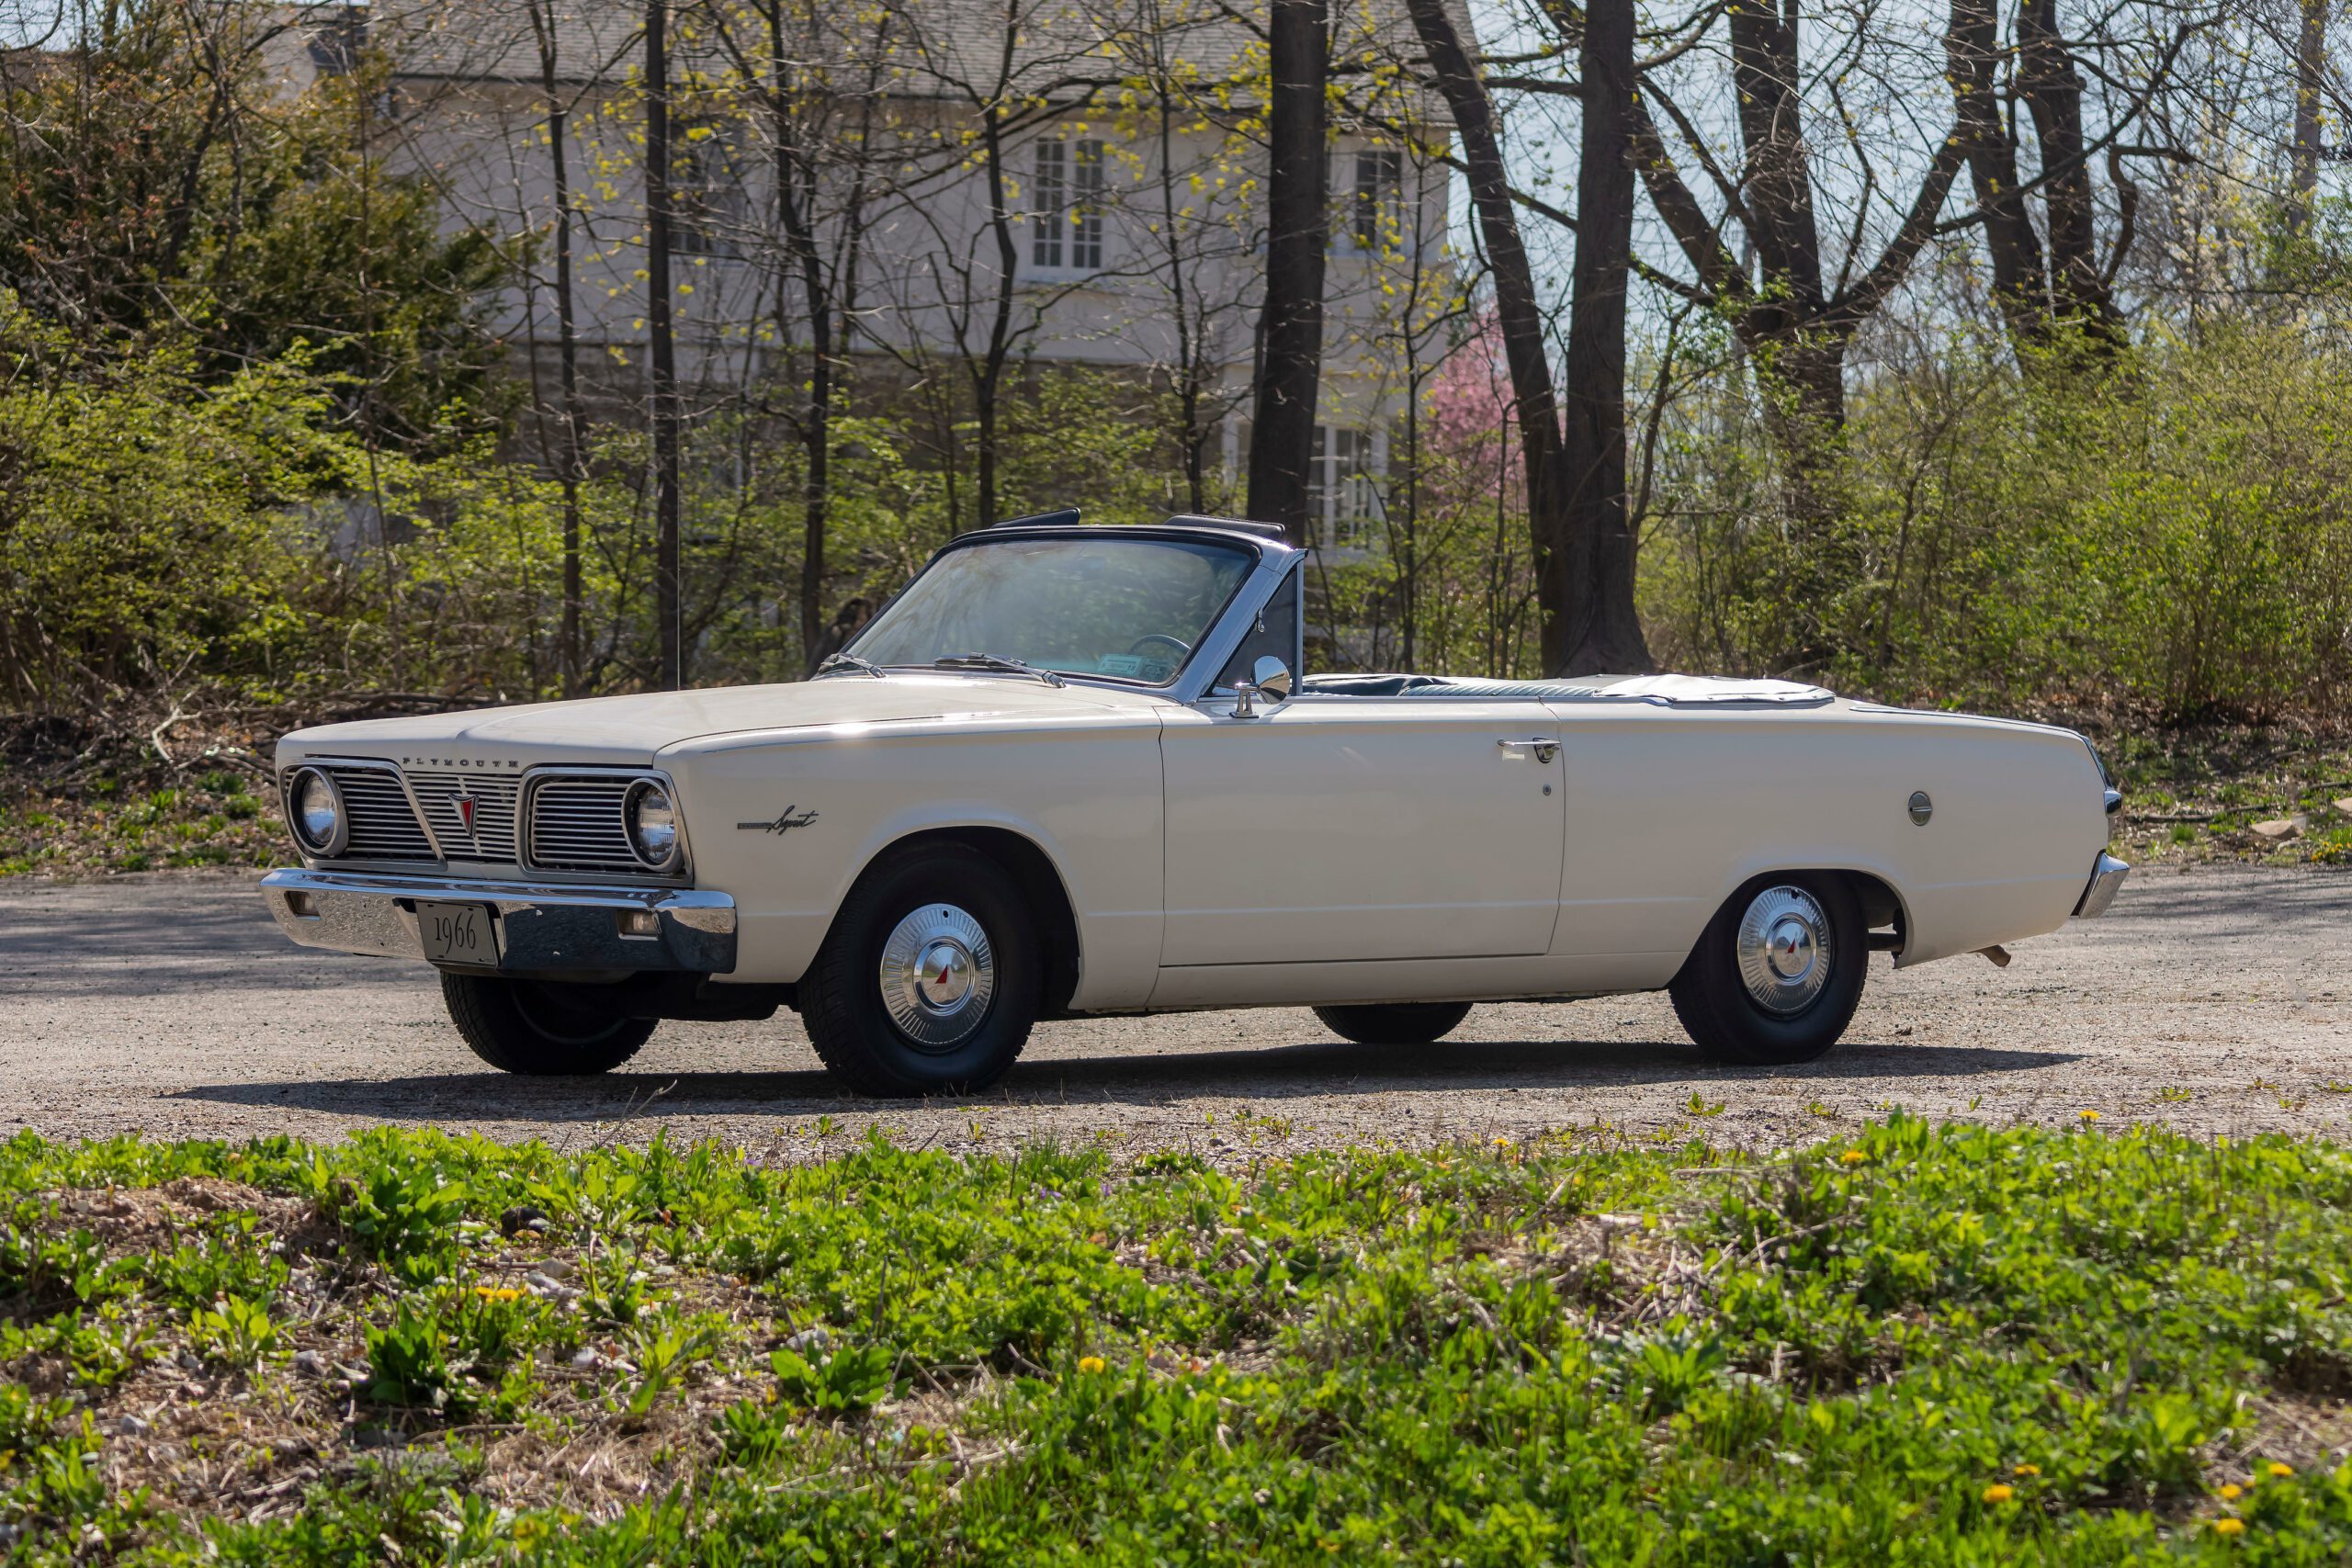 1966 Plymouth Valiant Signet Convertible, Plymouth, Plymouth Valiant